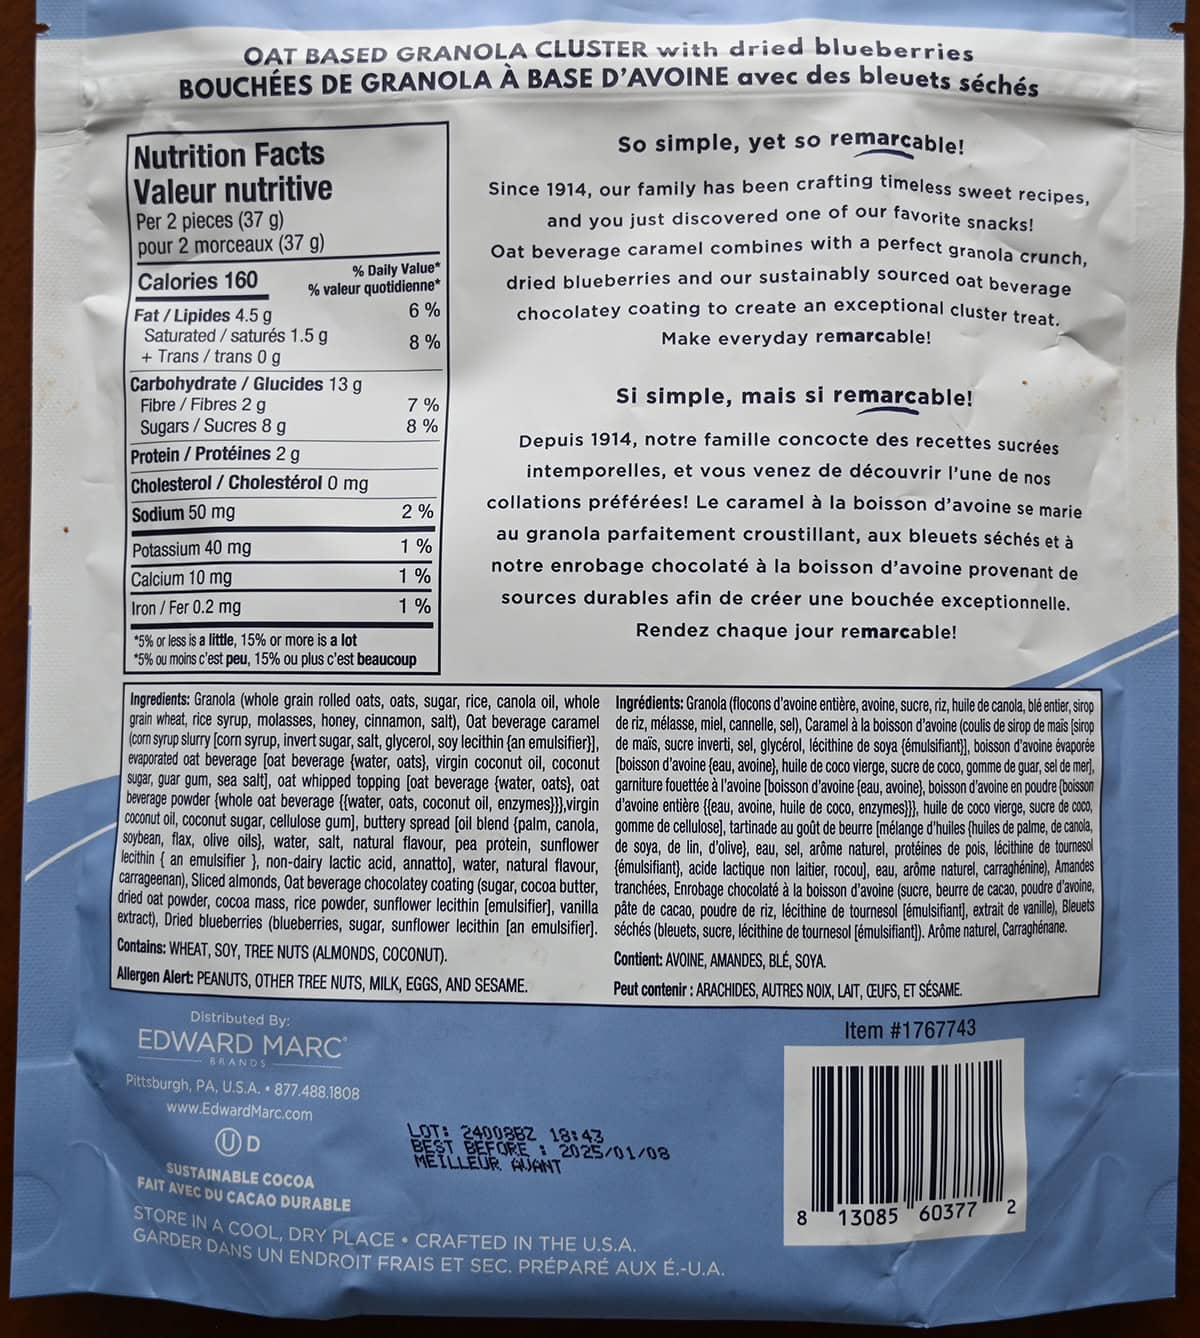 Closeup image of the back of the Oat Based Granola Snappers showing the product description.